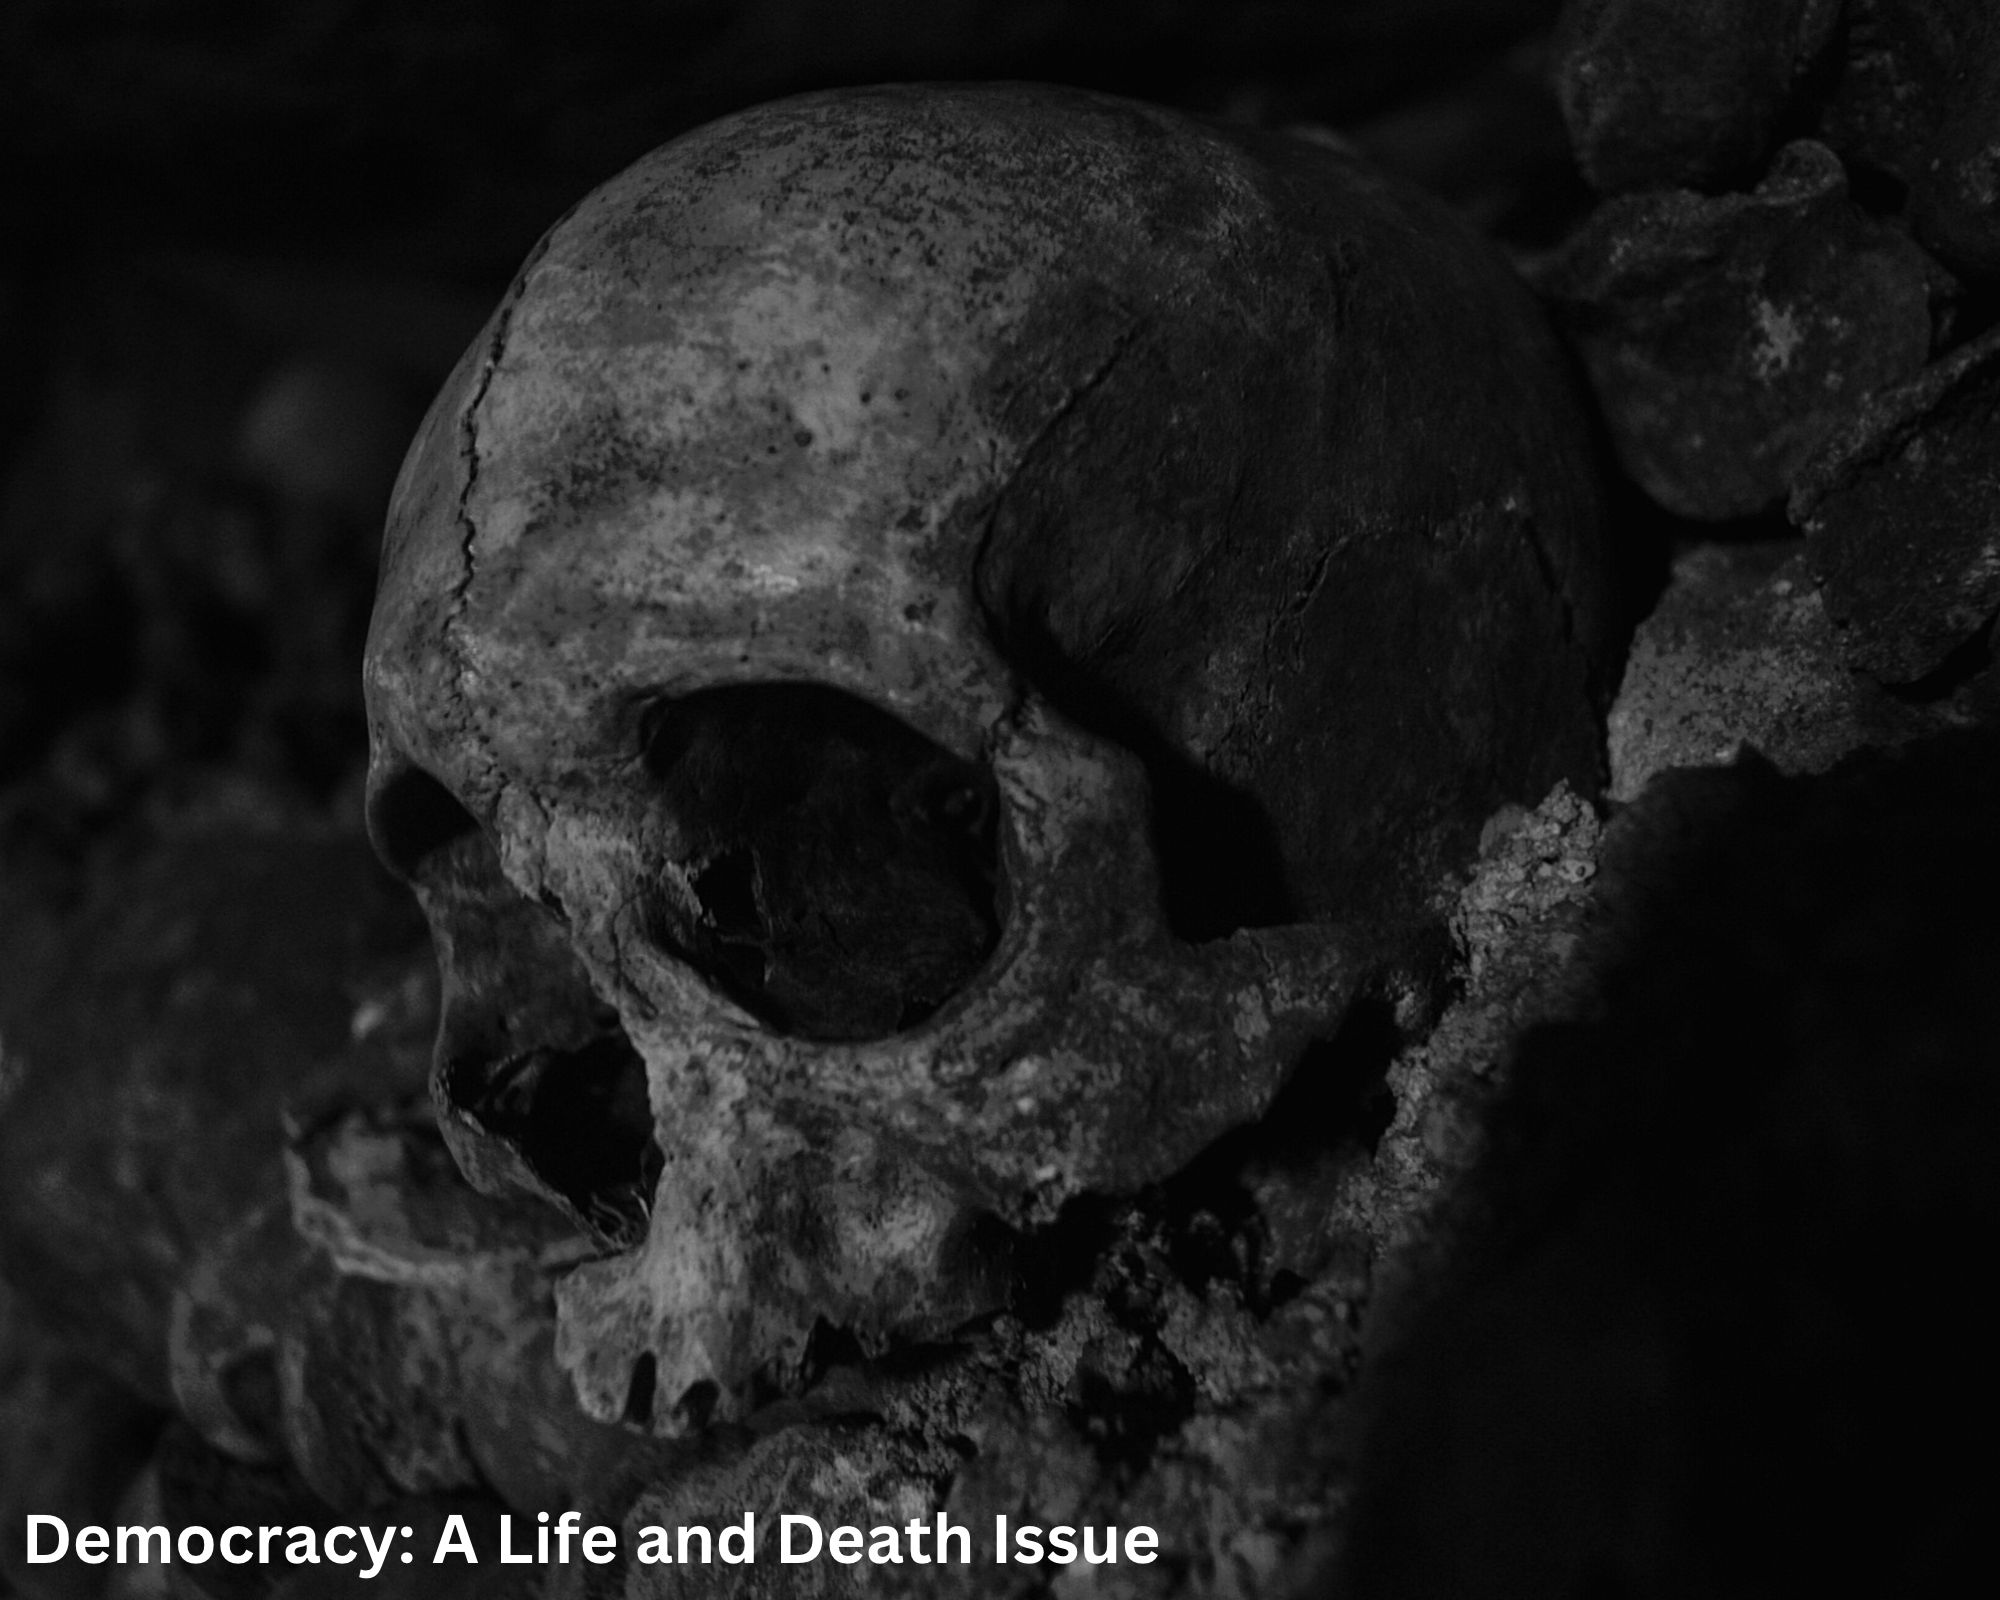 Democracy: A Life and Death Issue